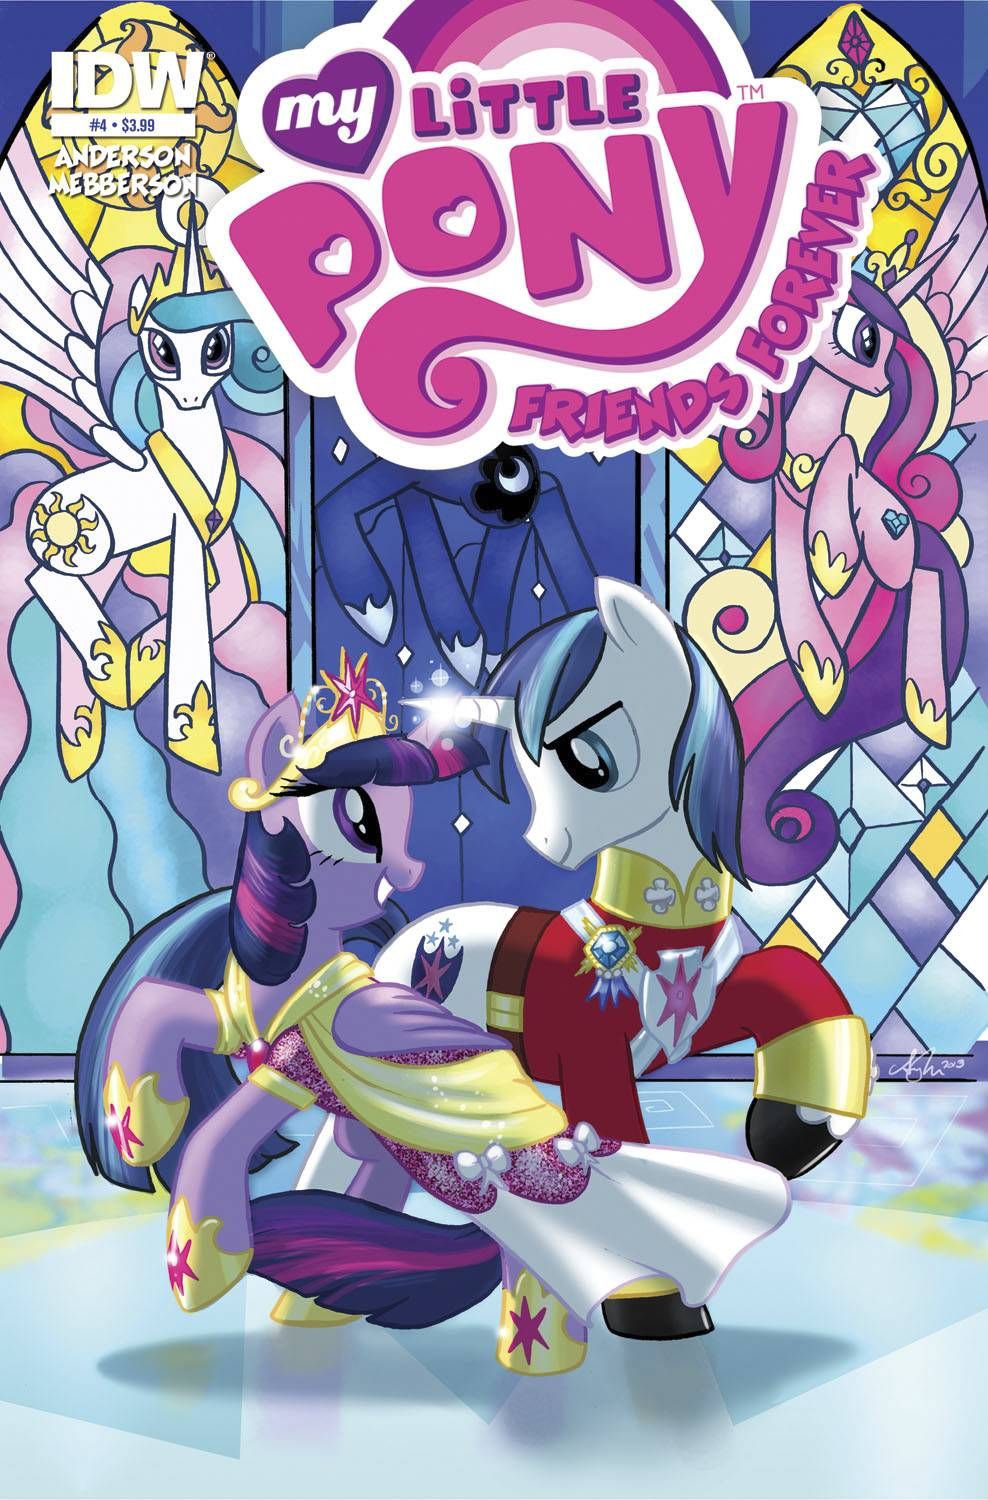 My Little Pony Friends Forever #4 Comic